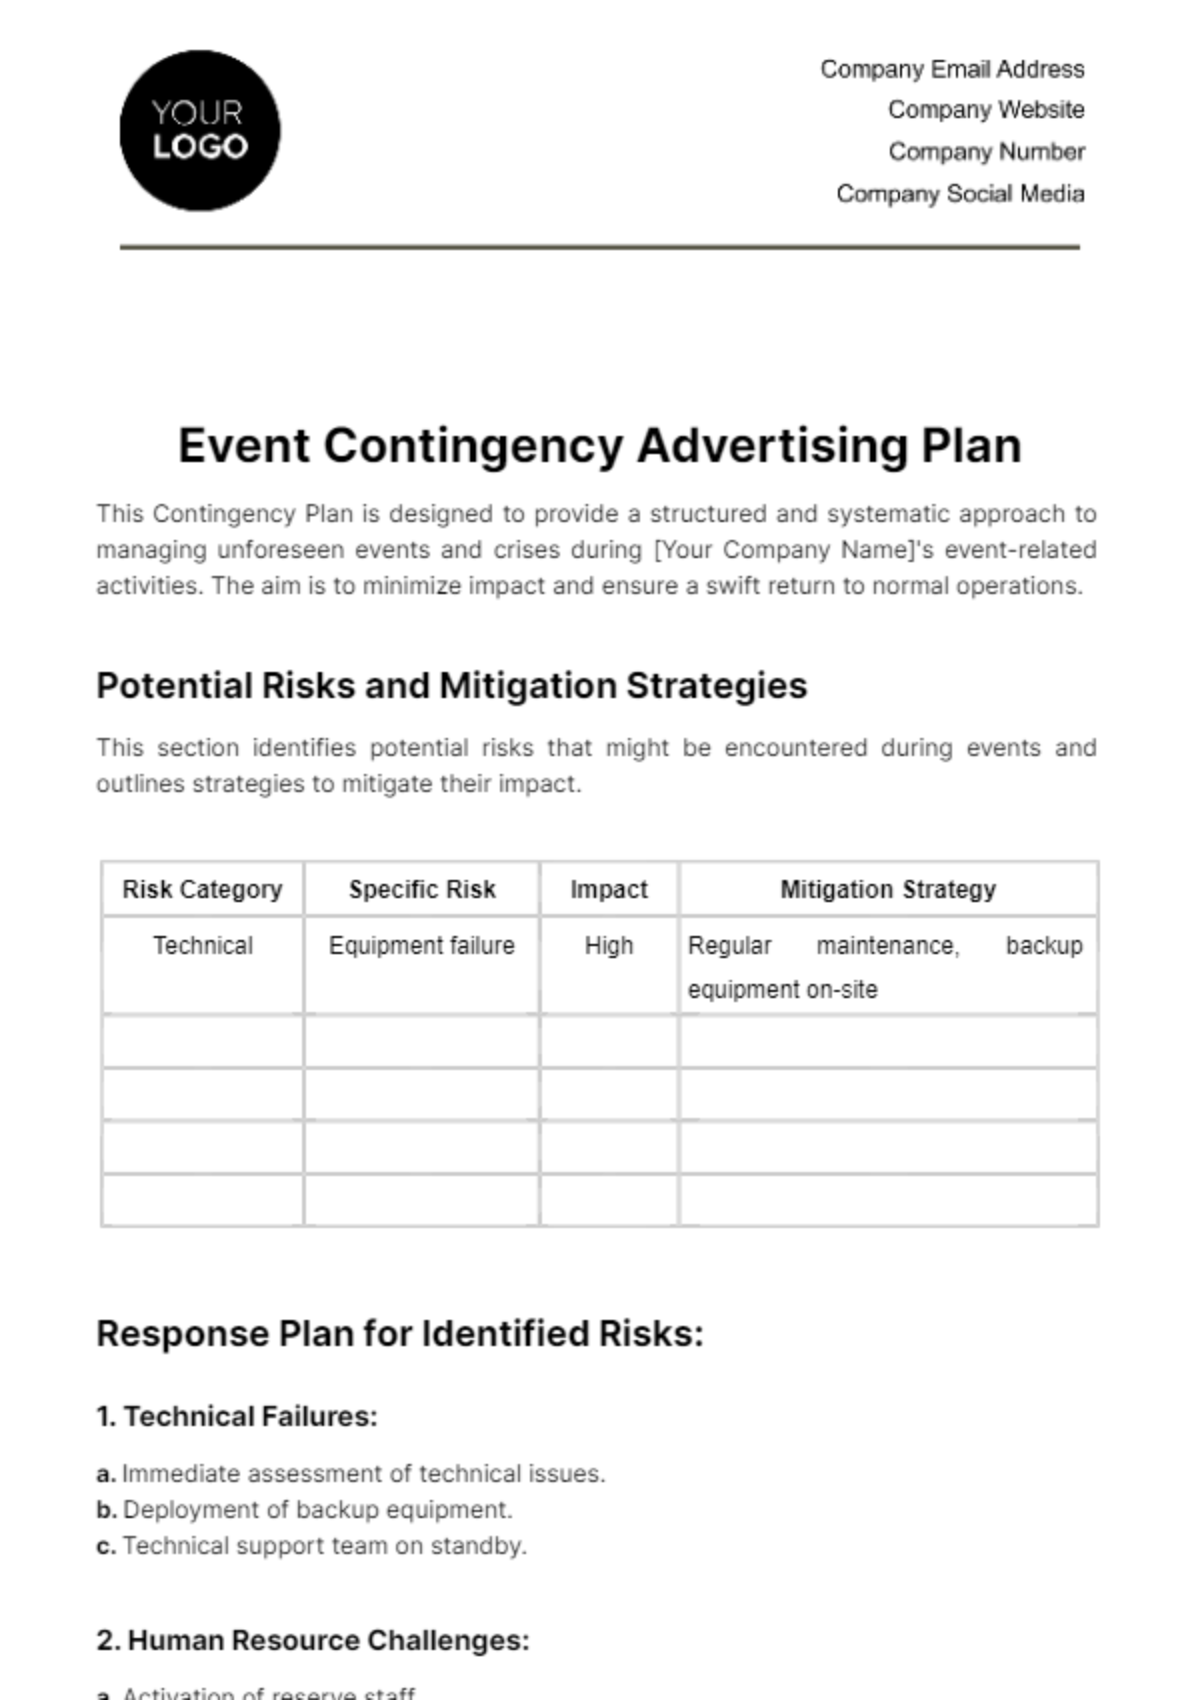 Free Event Contingency Advertising Plan Template